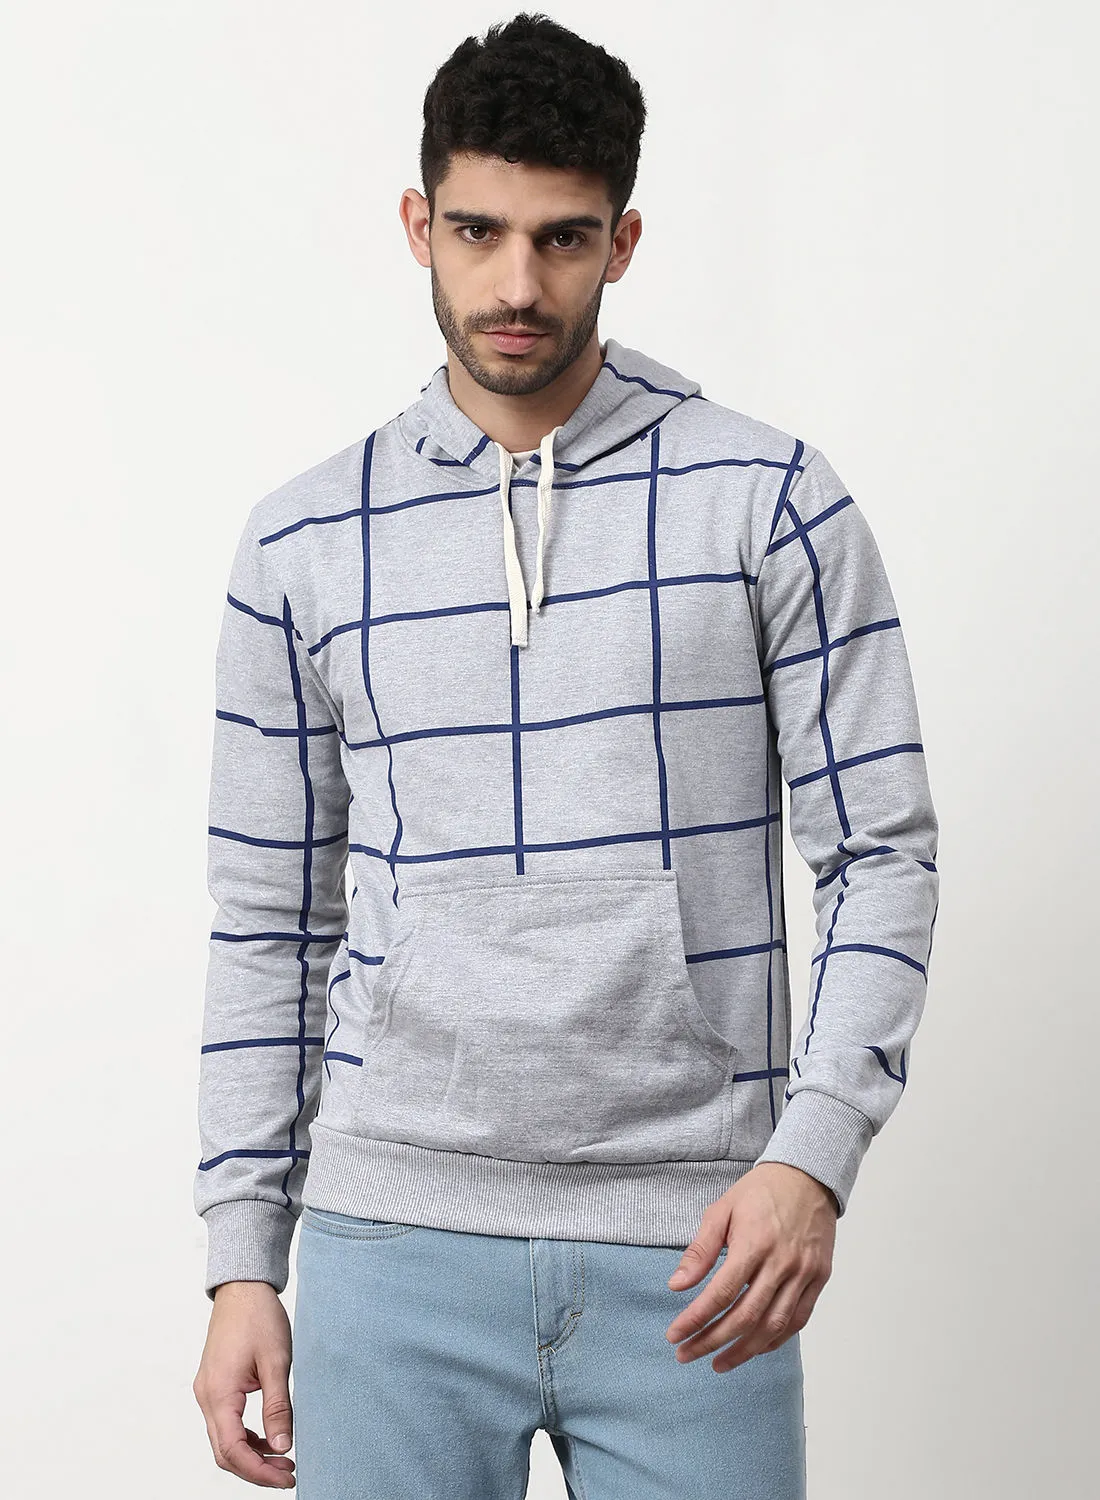 Campus Sutra Stylish Comfortable Hoodie Grey/Blue